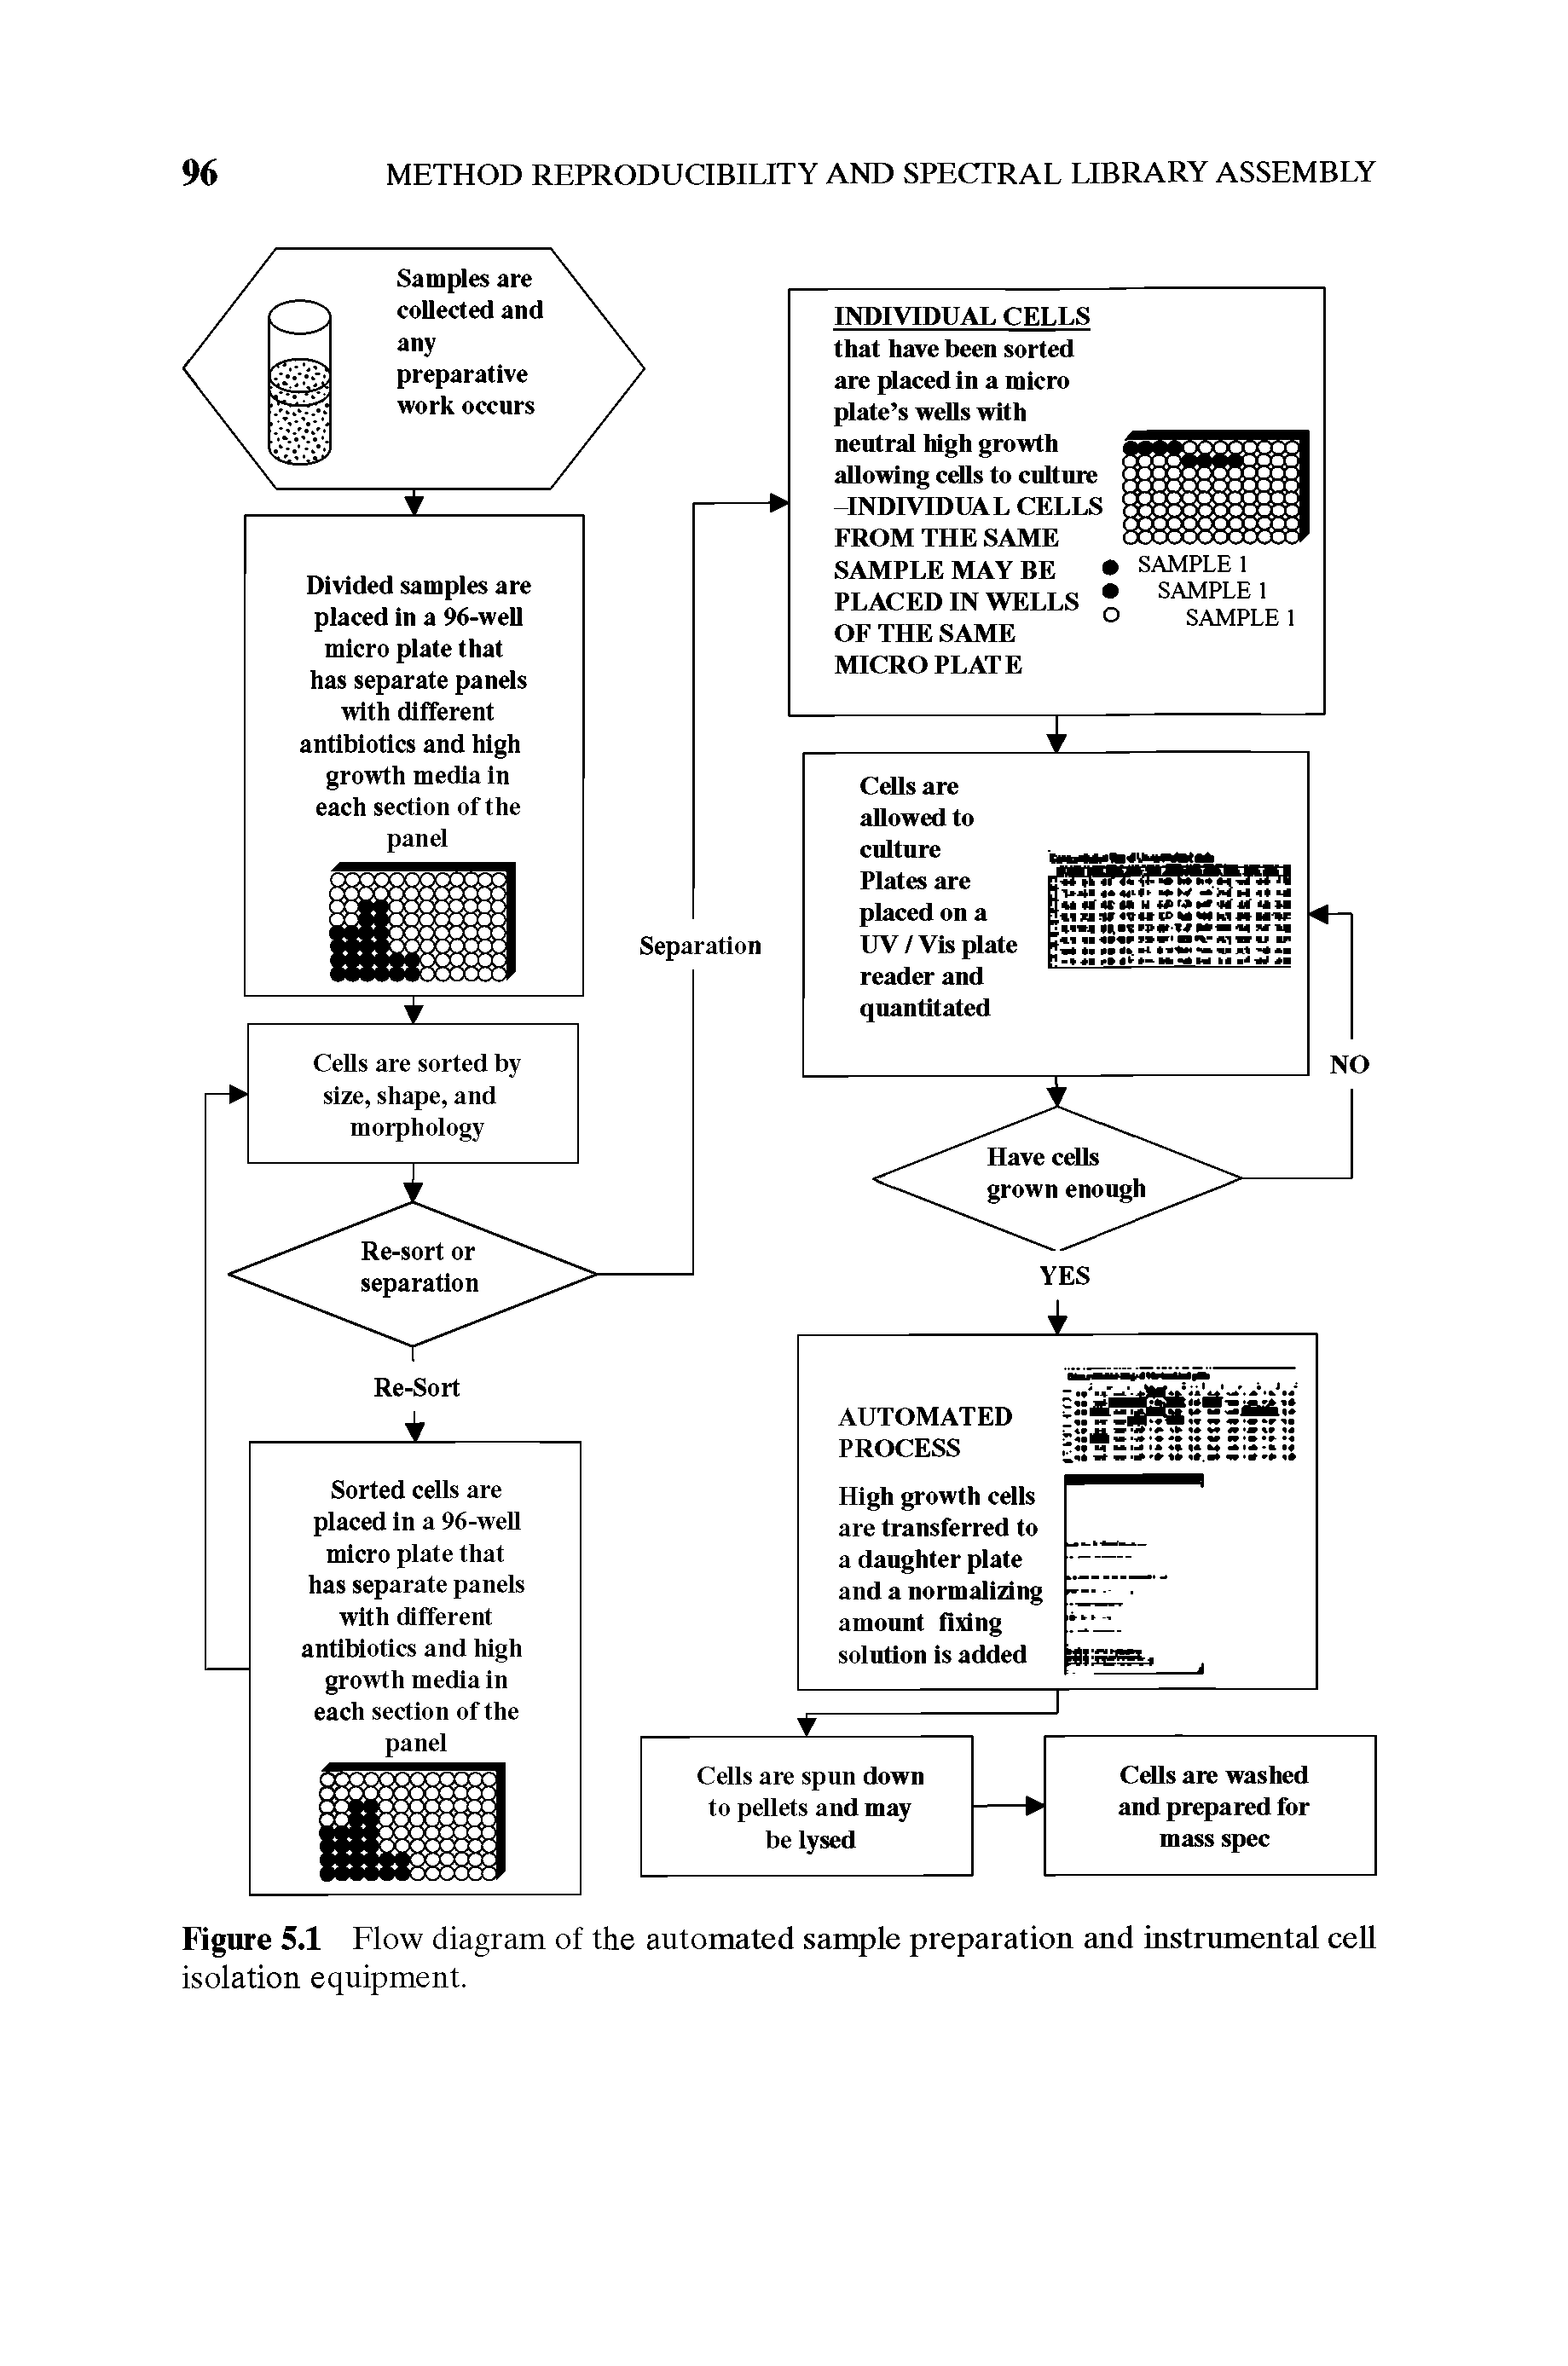 Figure 5.1 Flow diagram of the automated sample preparation and instrumental cell isolation equipment.